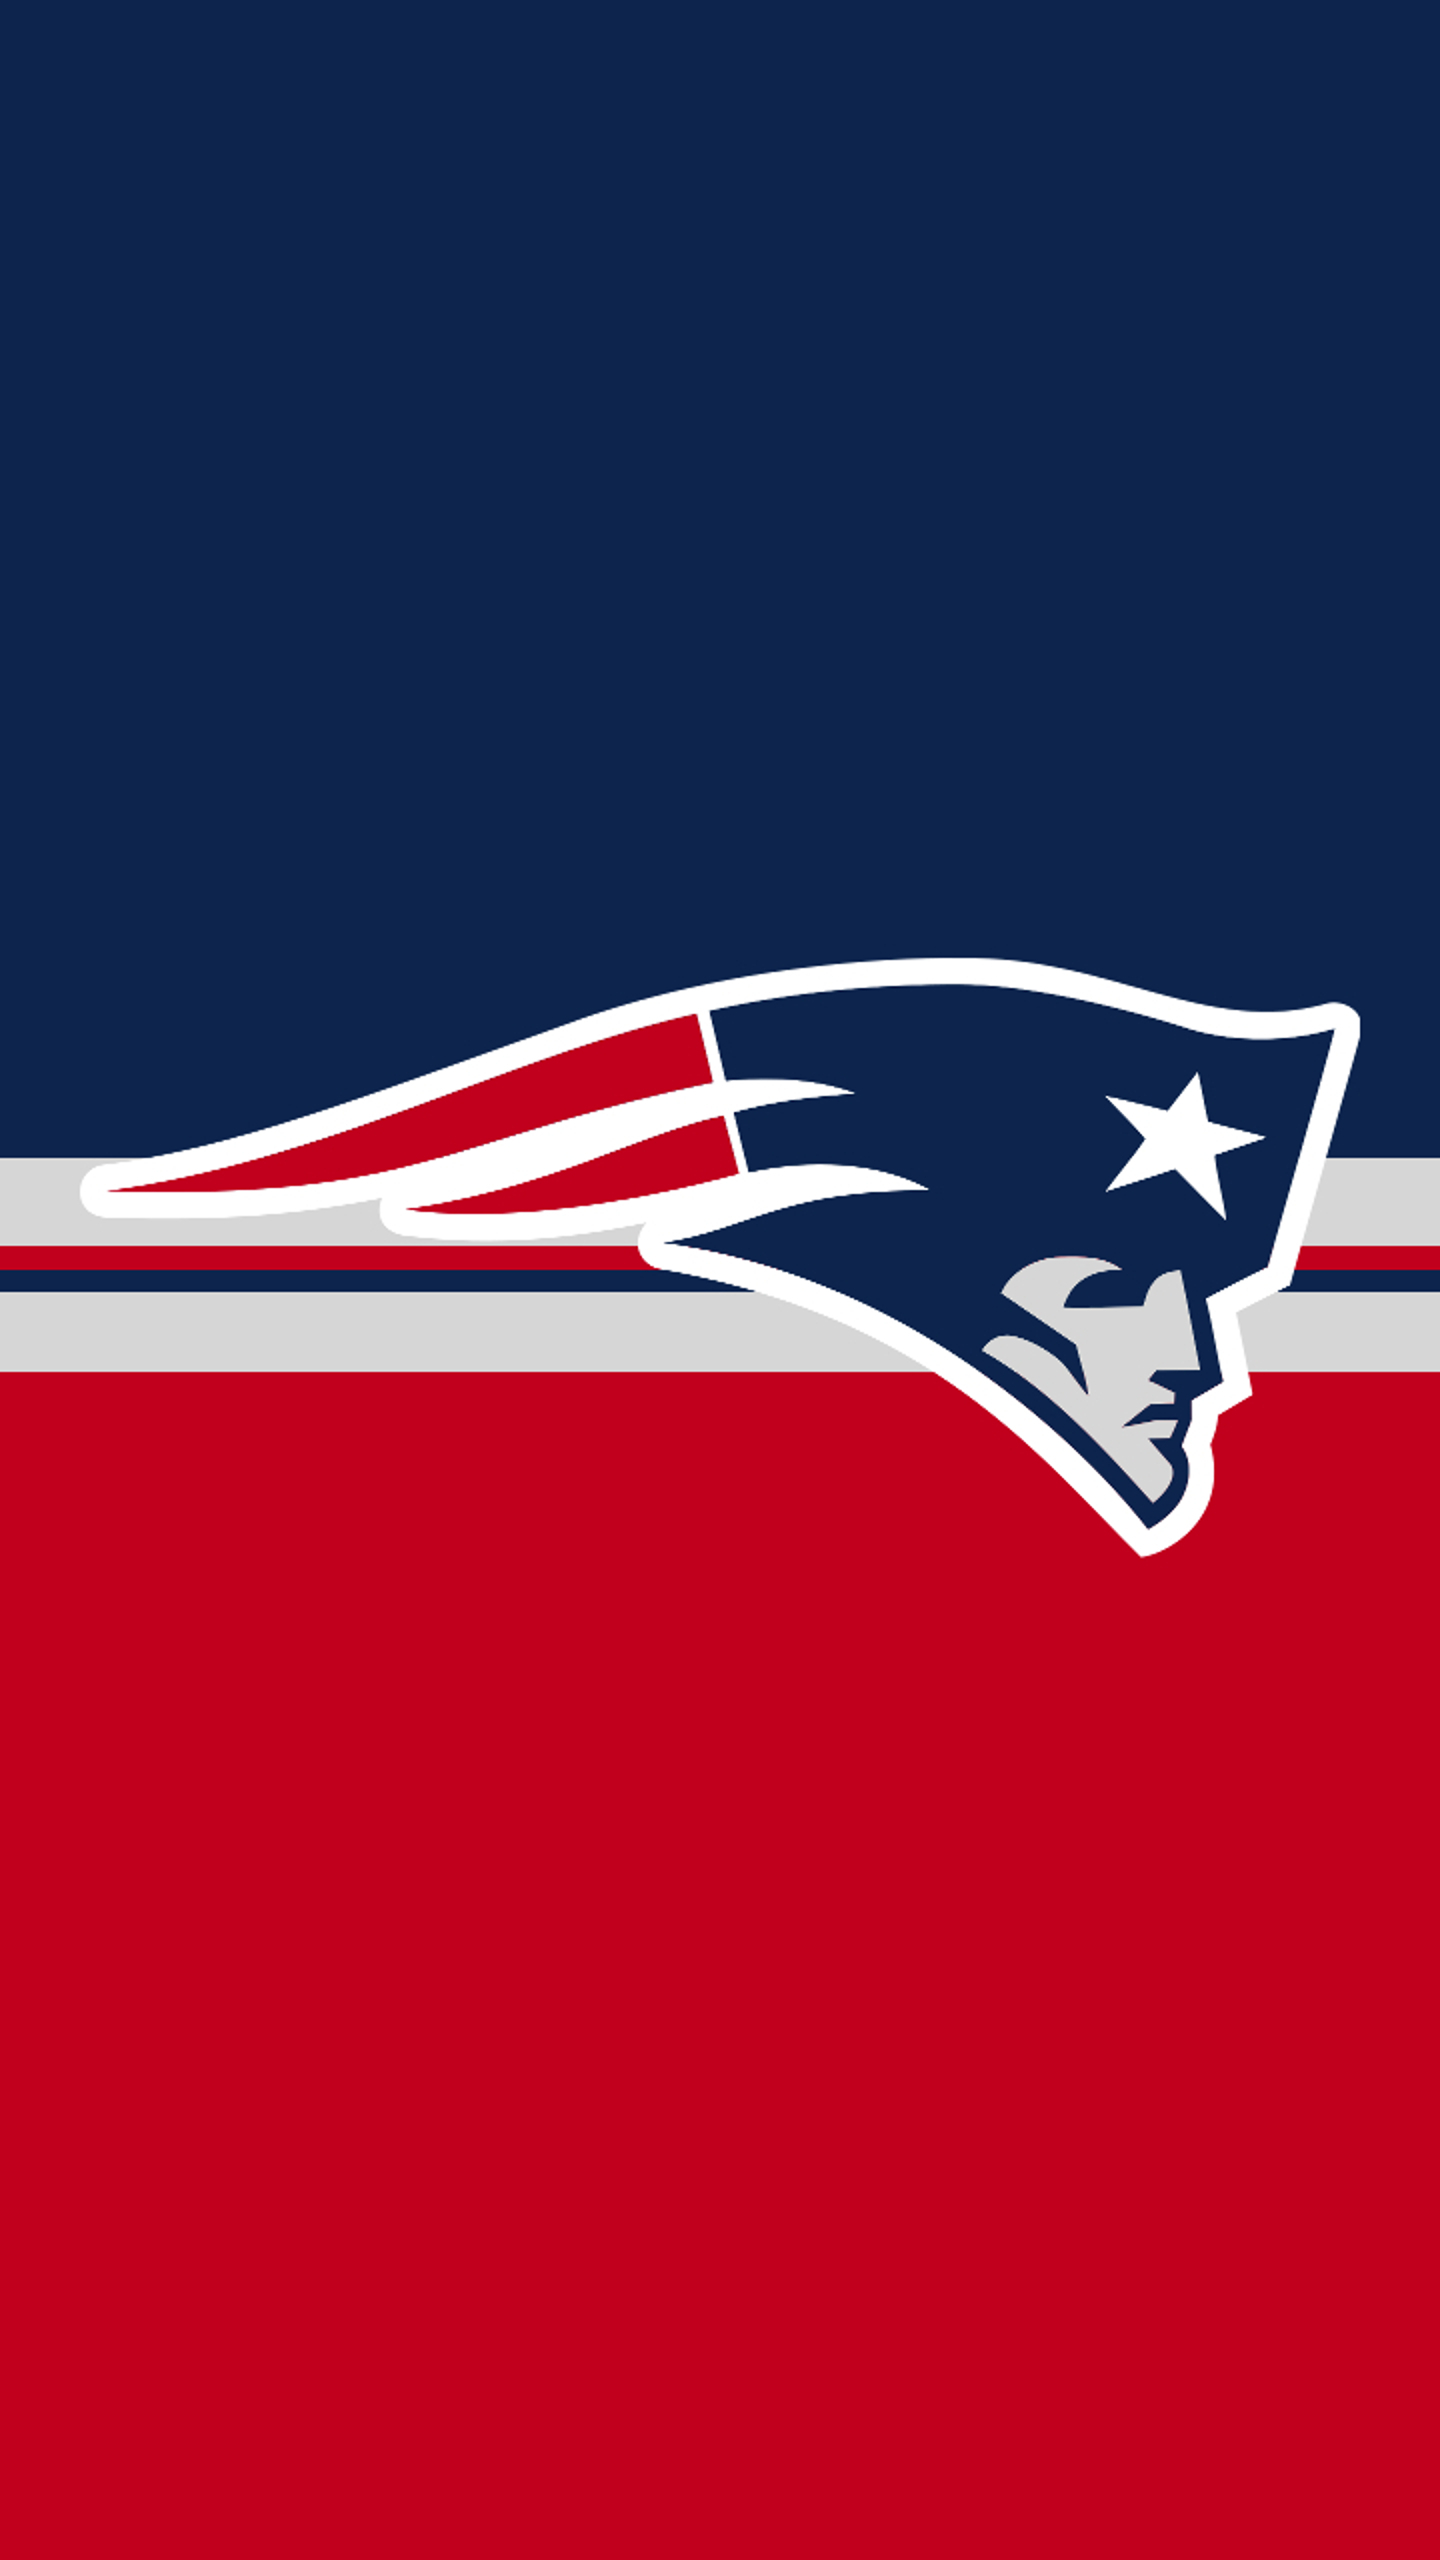 1440x2560 Made a New England Patriots Mobile Wallpaper, Tell Me What You Think! : r/ Patriots